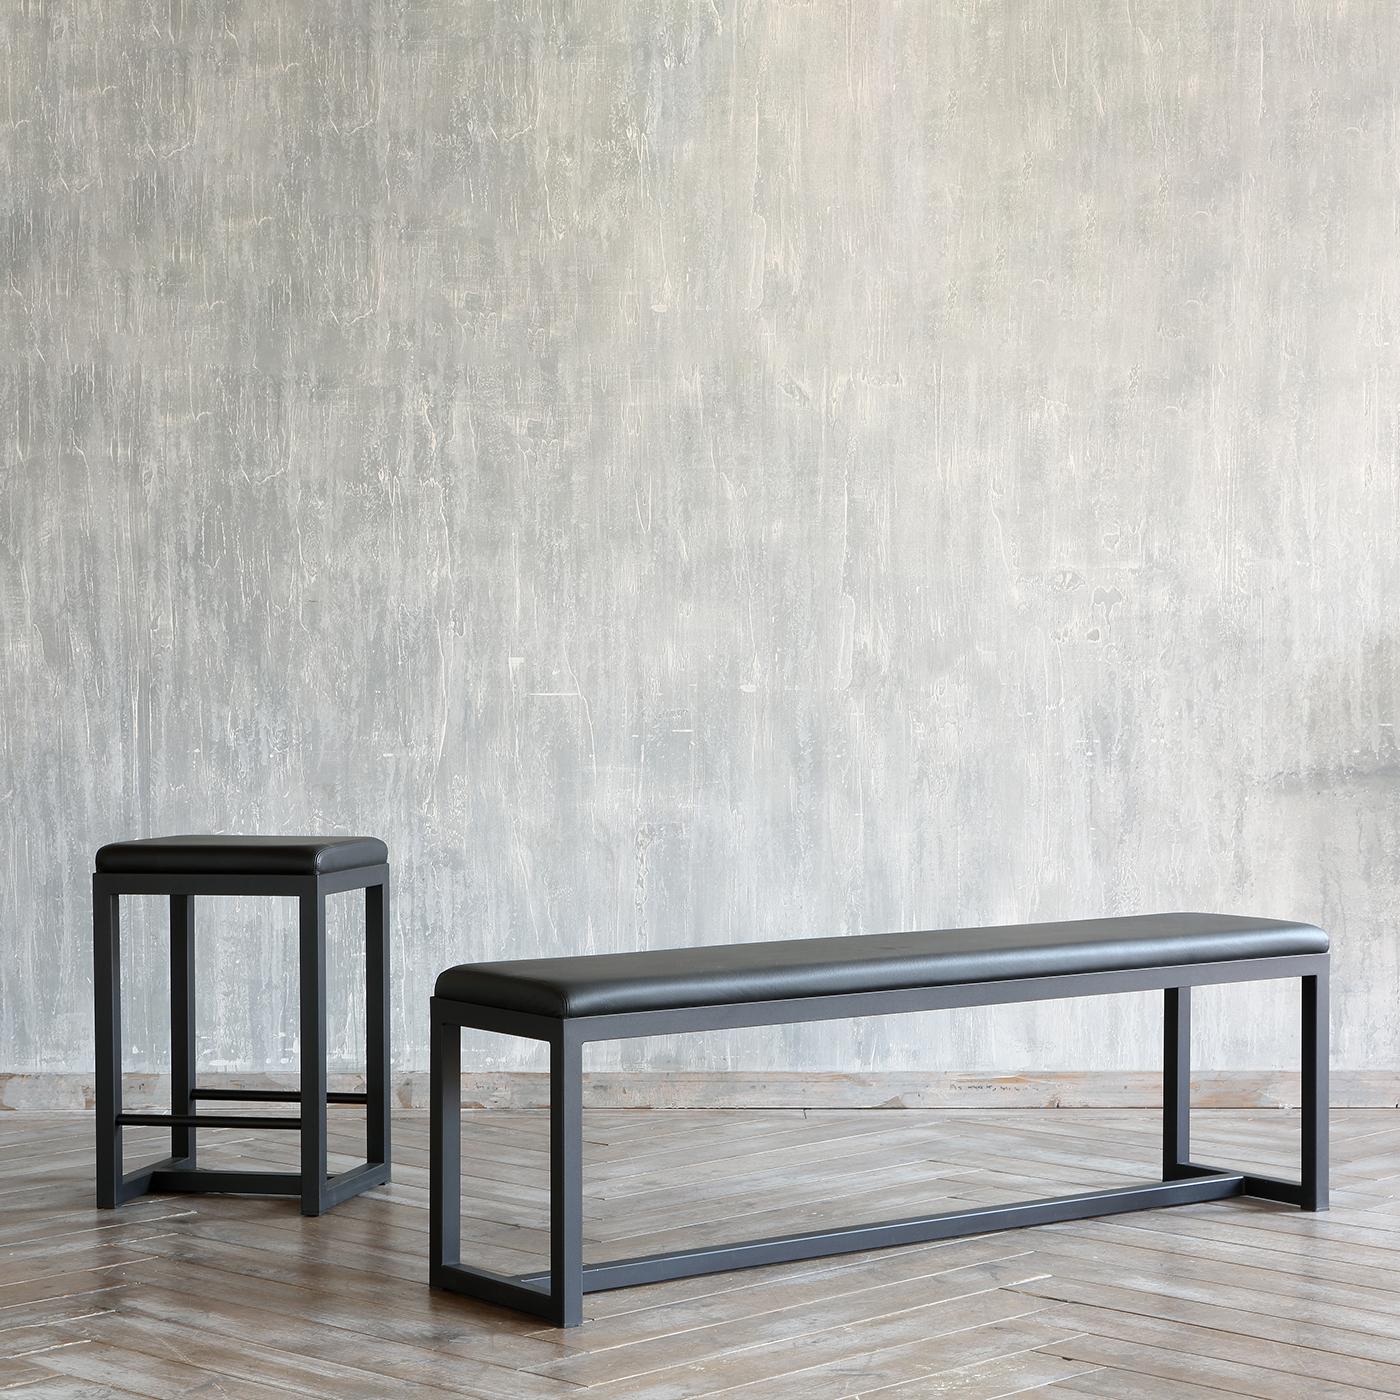 Generously padded and covered with fine black leather, the linear 48cm-high seat of this exclusive bench states its sophisticated allure at first glance. A linear bar joints the elements otherwise making up a sleigh structure, fashioned of copper